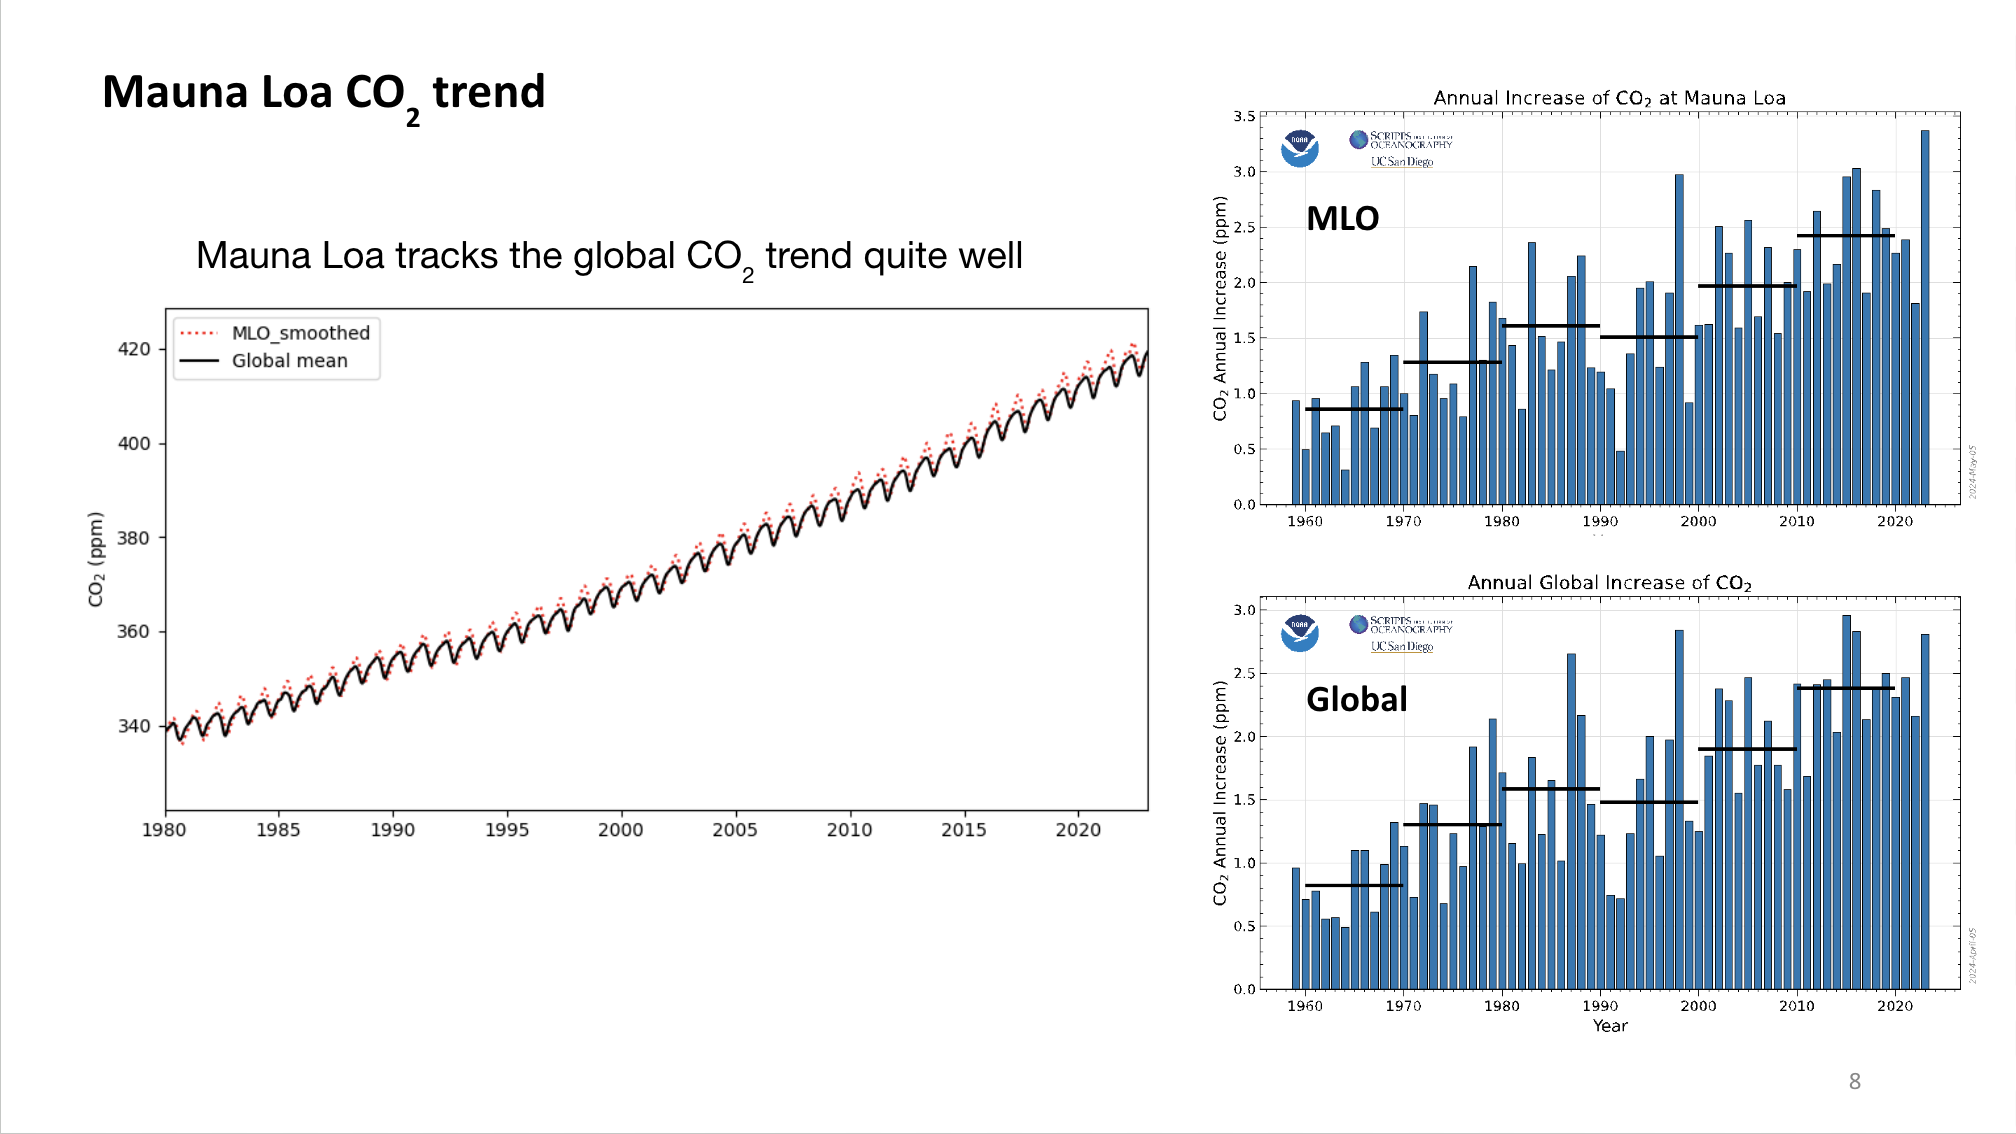 These graphs compare the rise of atmospheric carbon dioxide (CO2) in Mauna Loa and global records.